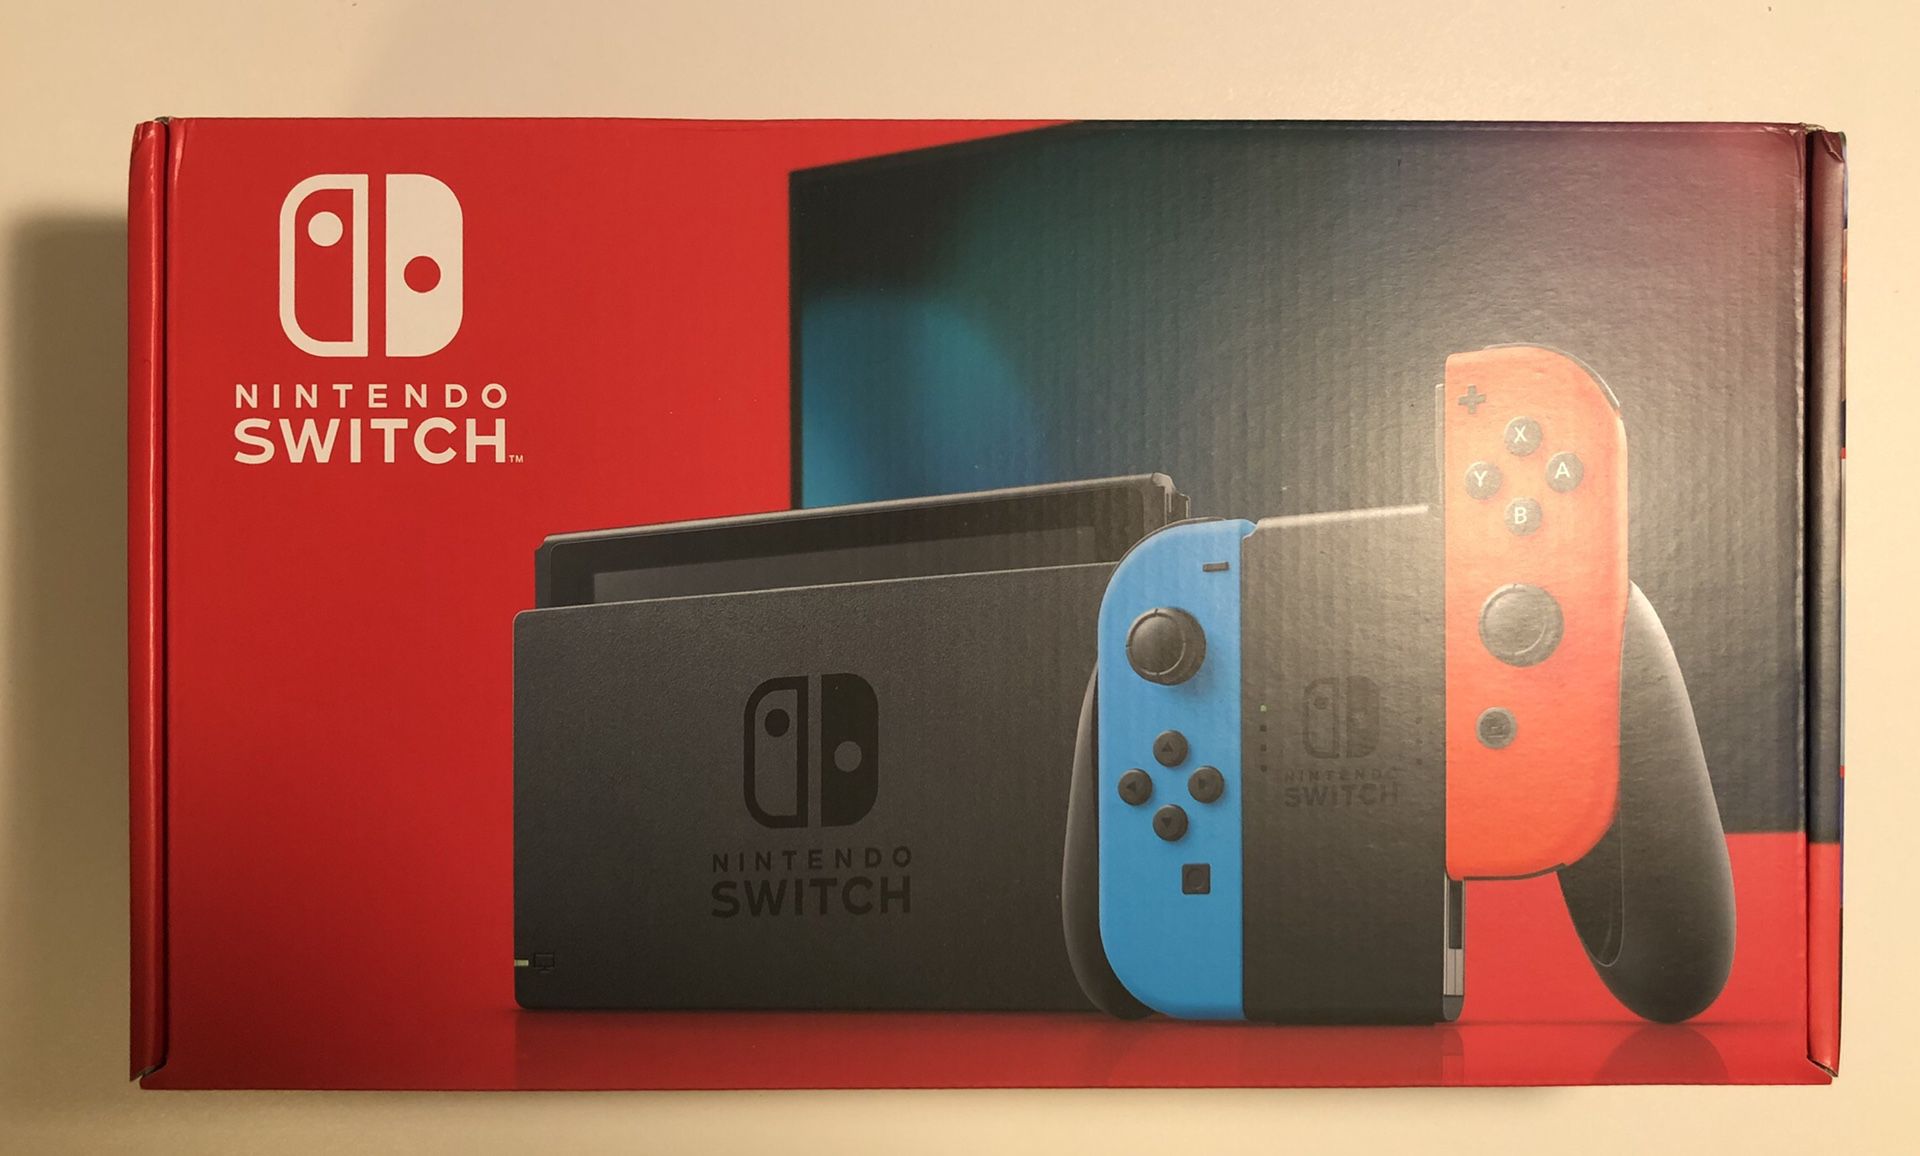 BRAND NEW Nintendo Switch 32GB Gray Console with Neon Red and Neon Blue Joy-Con